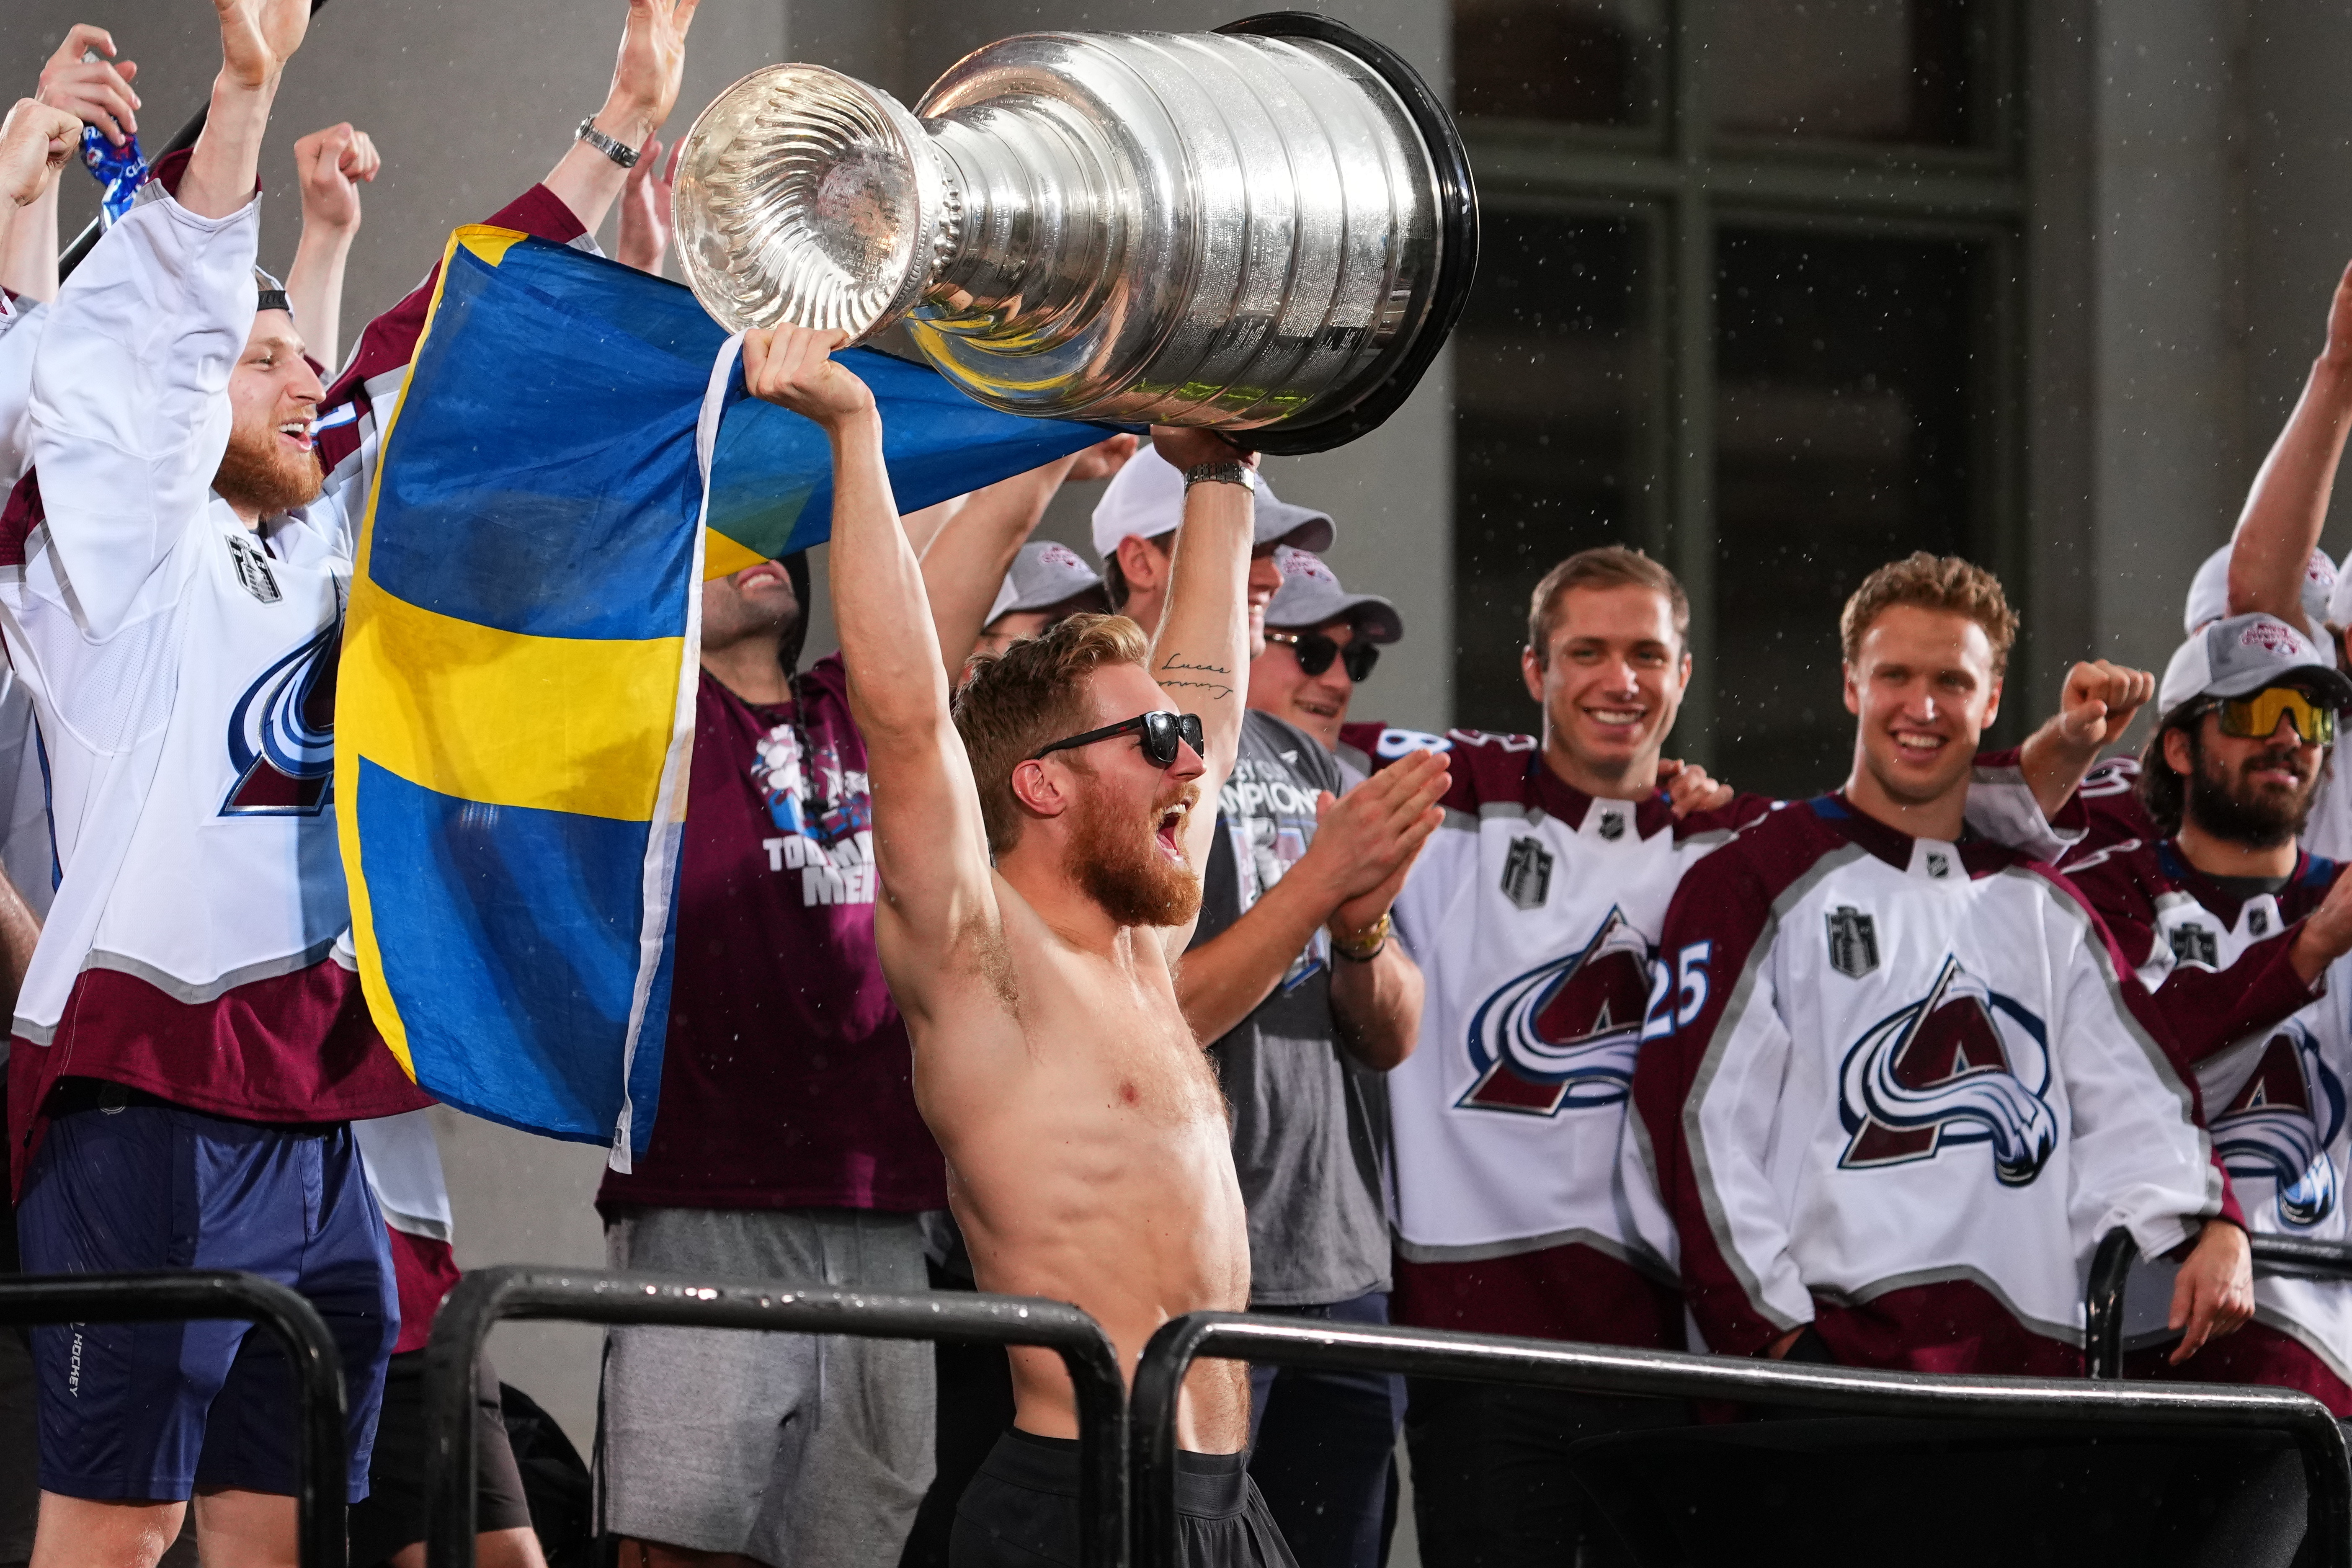 Celebrate the Colorado Avalanche 2022 Stanley Cup Championship